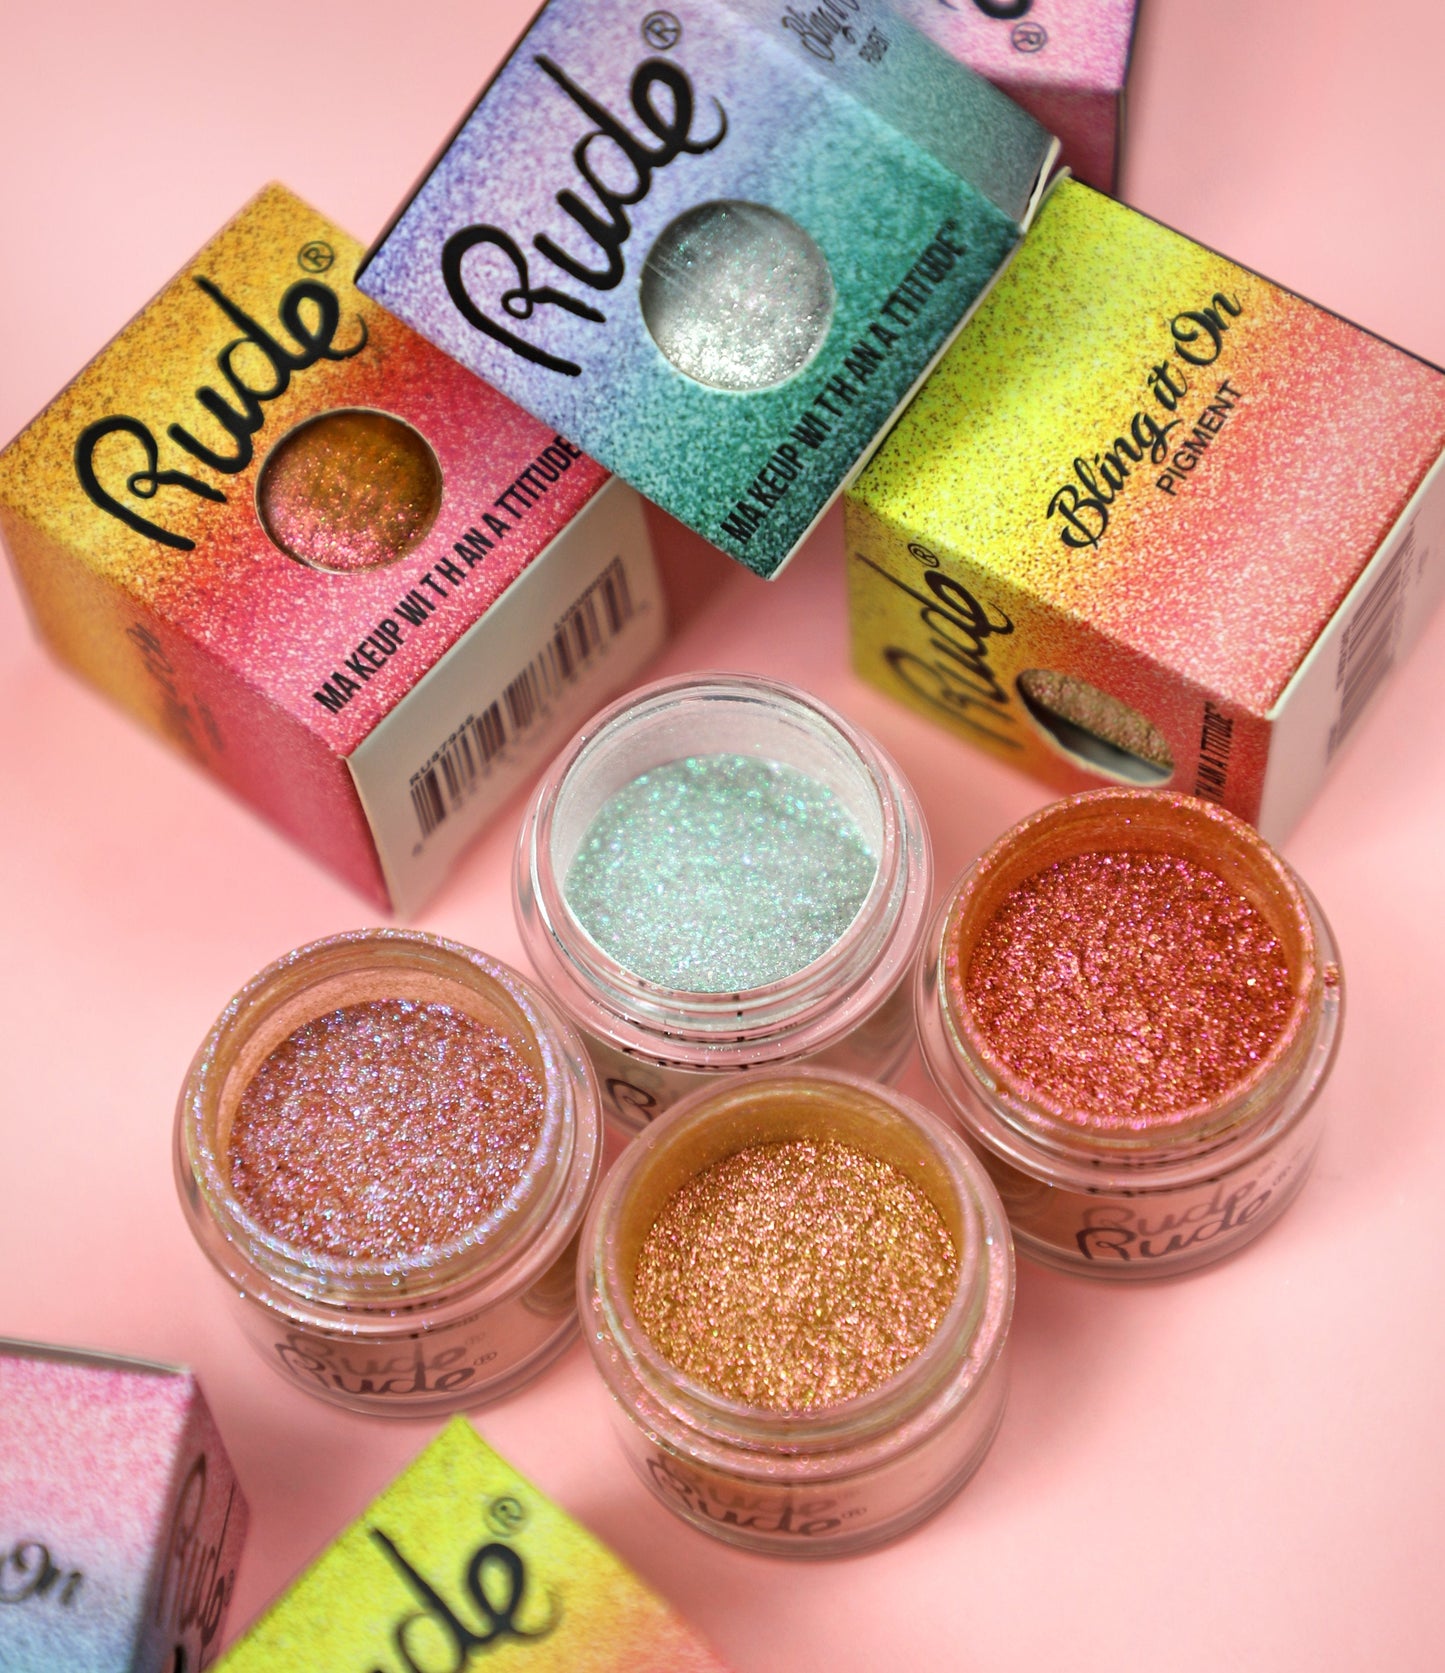 RUDE Bling It On Pigment Acrylic Display Set, 48 Pieces